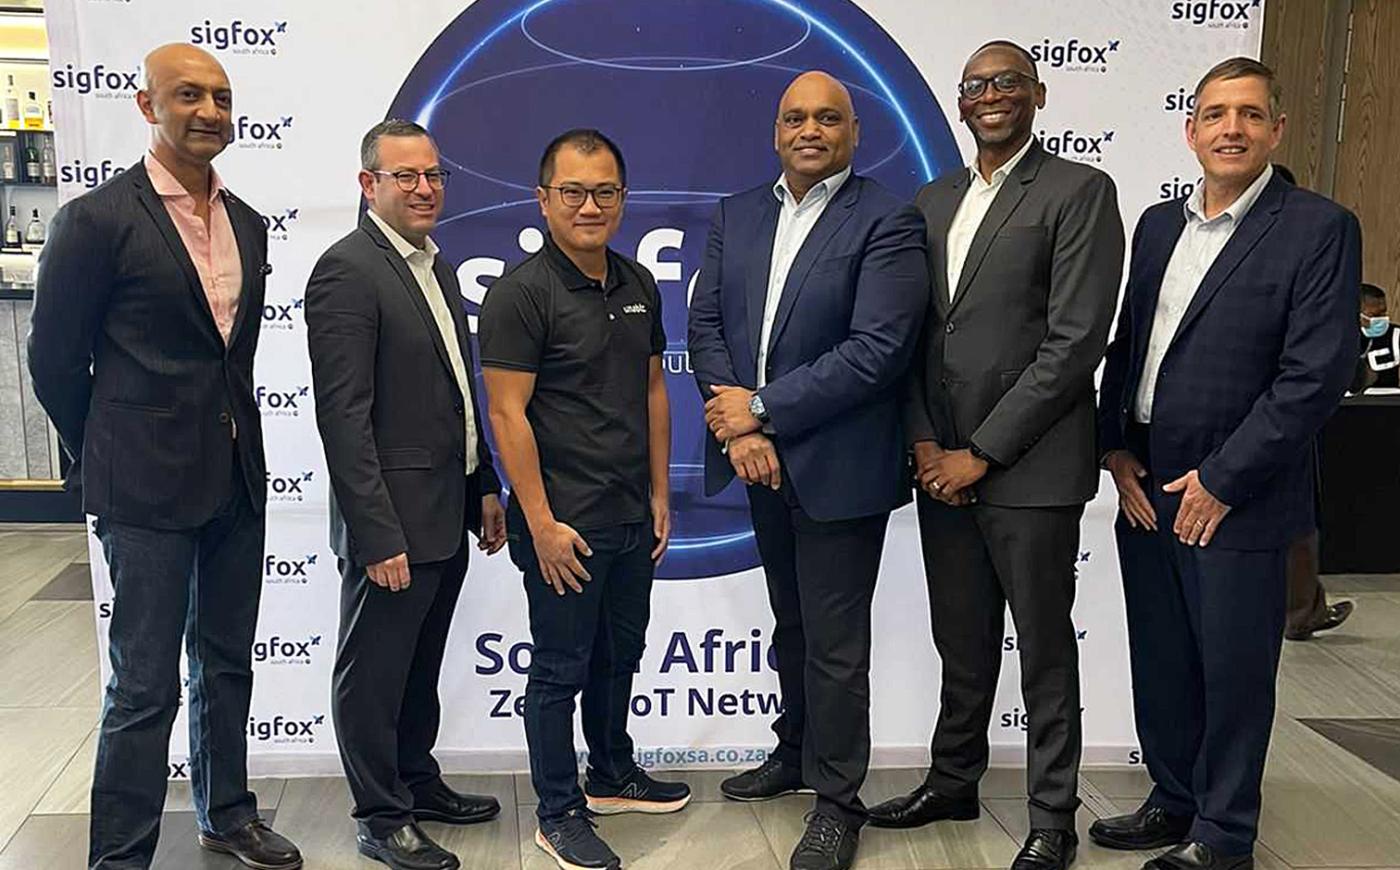 sigfox south africa launch